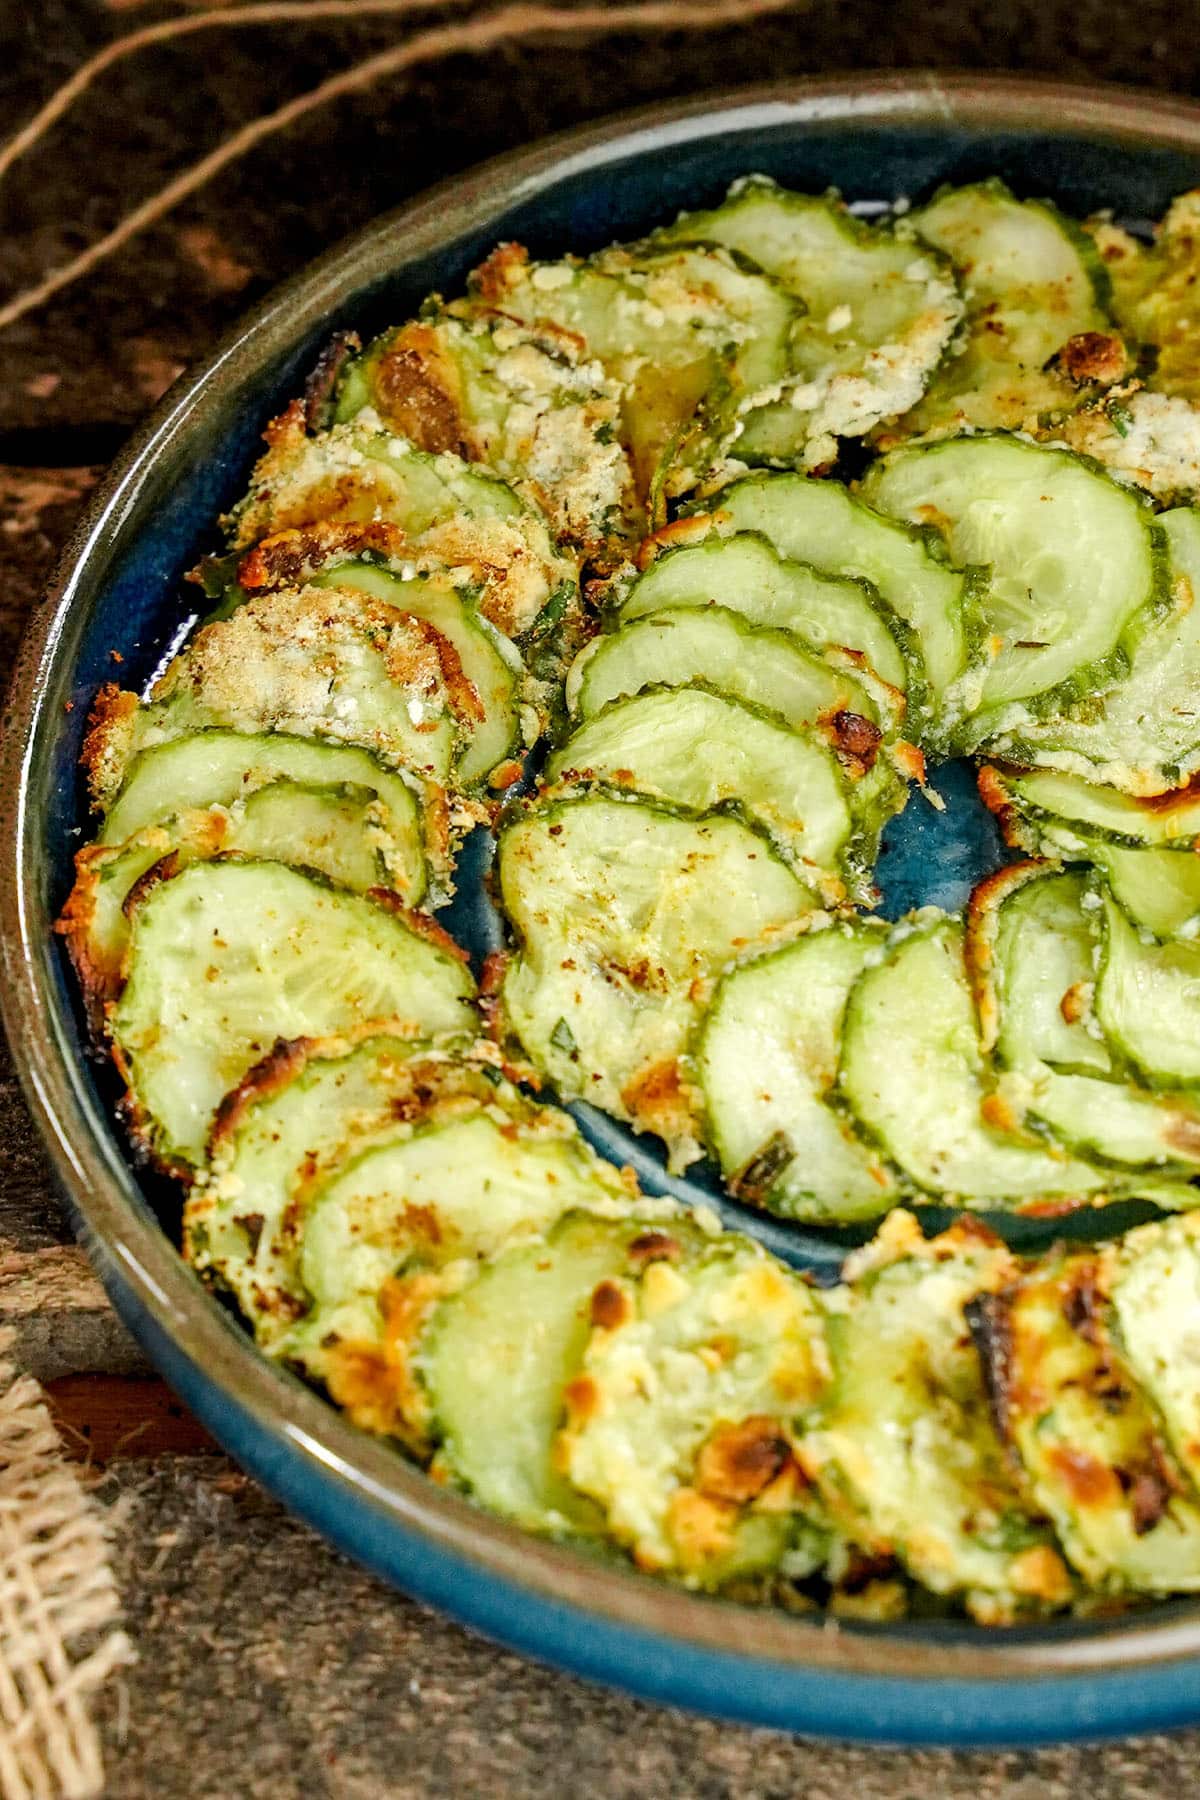 Cucumber chips on a plate